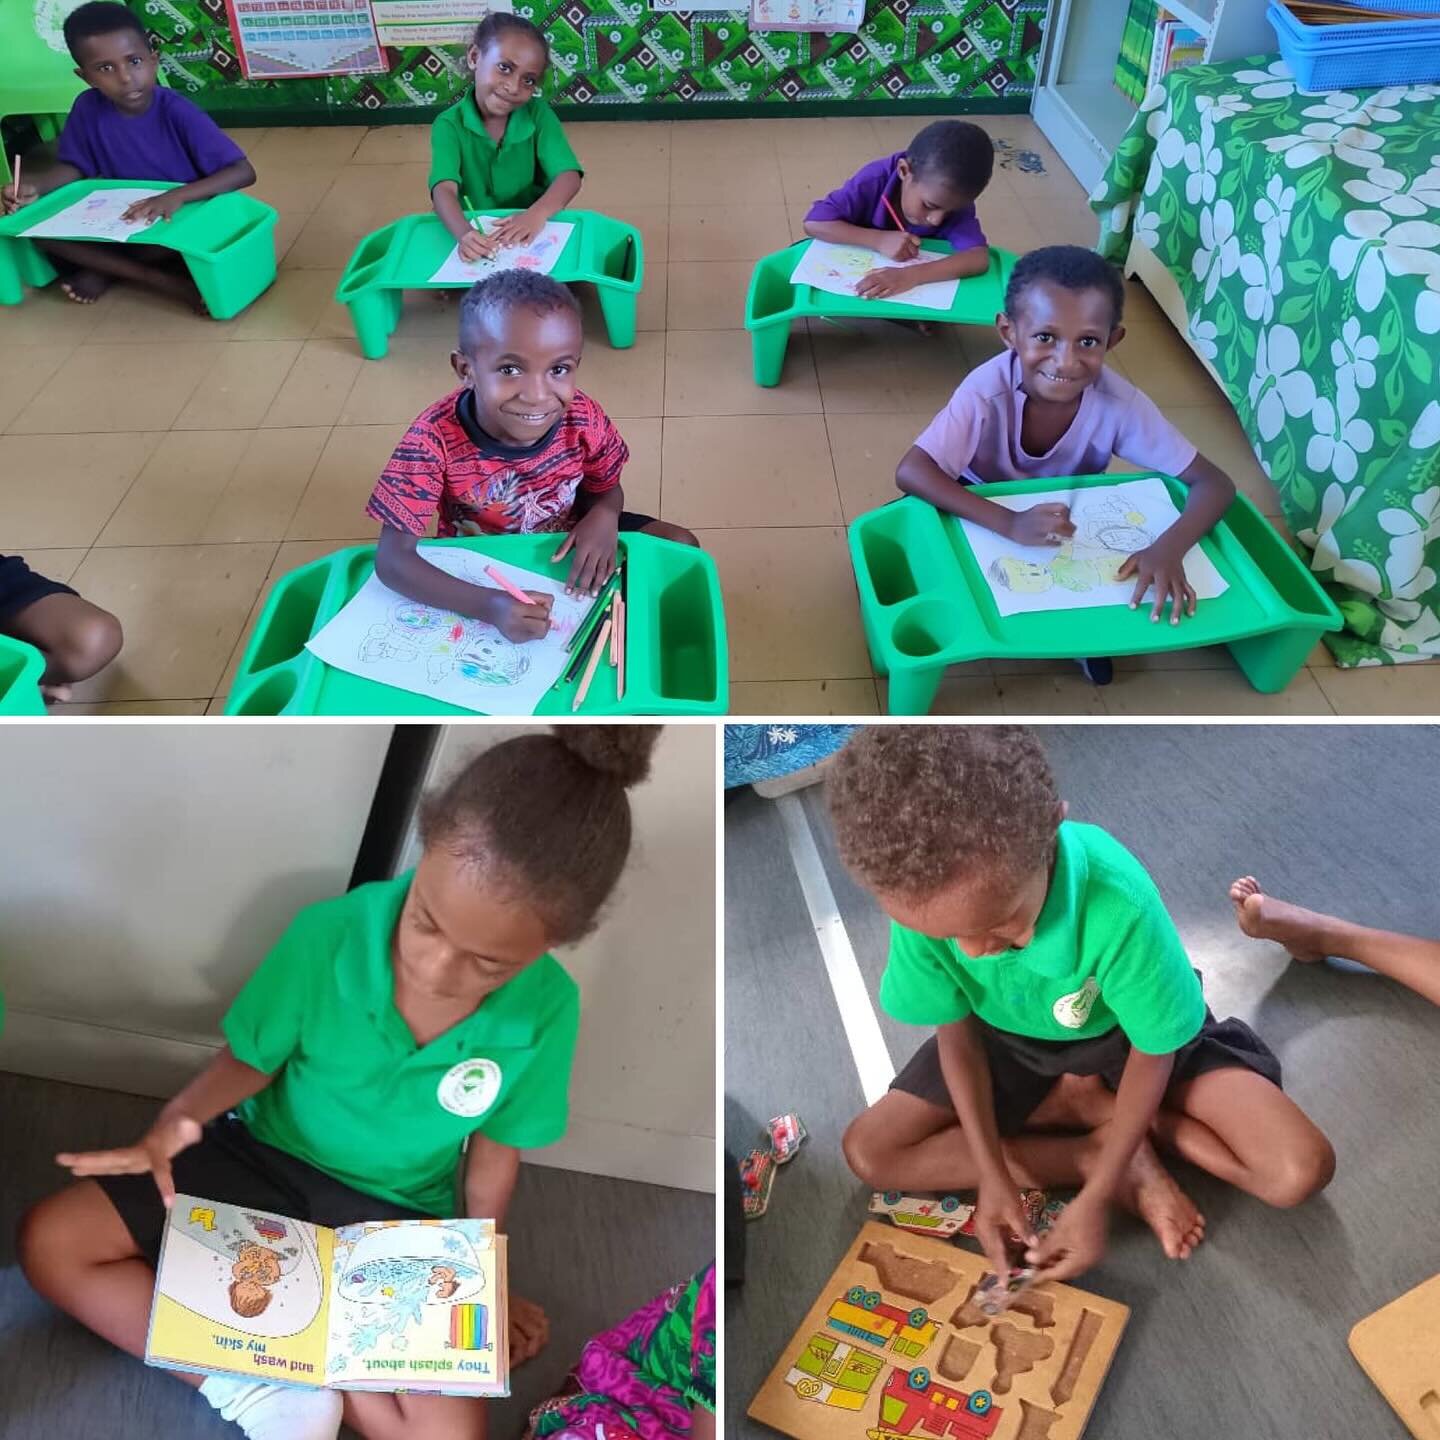 And that&rsquo;s a wrap for Term 1 of our Early Childhood Education program. All our 50 Teacher-Librarians will be in Port Moresby next week for their annual teacher training. The children have had a busy first term learning how to learn. They will s